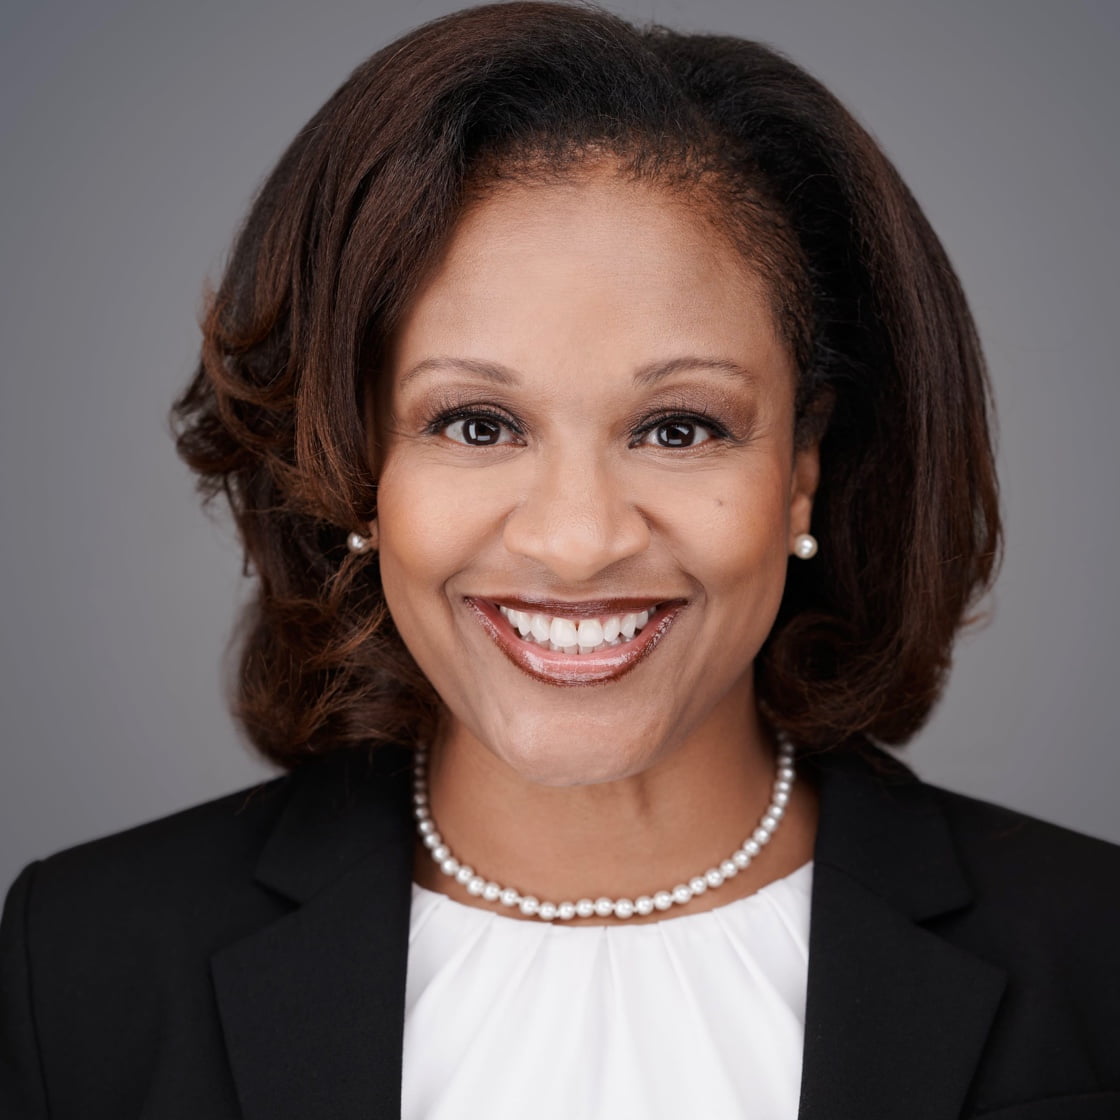 Latasha Akoma joined the American Woodmark Board of Directors on Friday, February 4, 2022. She currently serves as Operating Partner and Chief Compliance Officer at GENNX360, a leading private equity firm that specializes in middle market companies and operations specialists. 